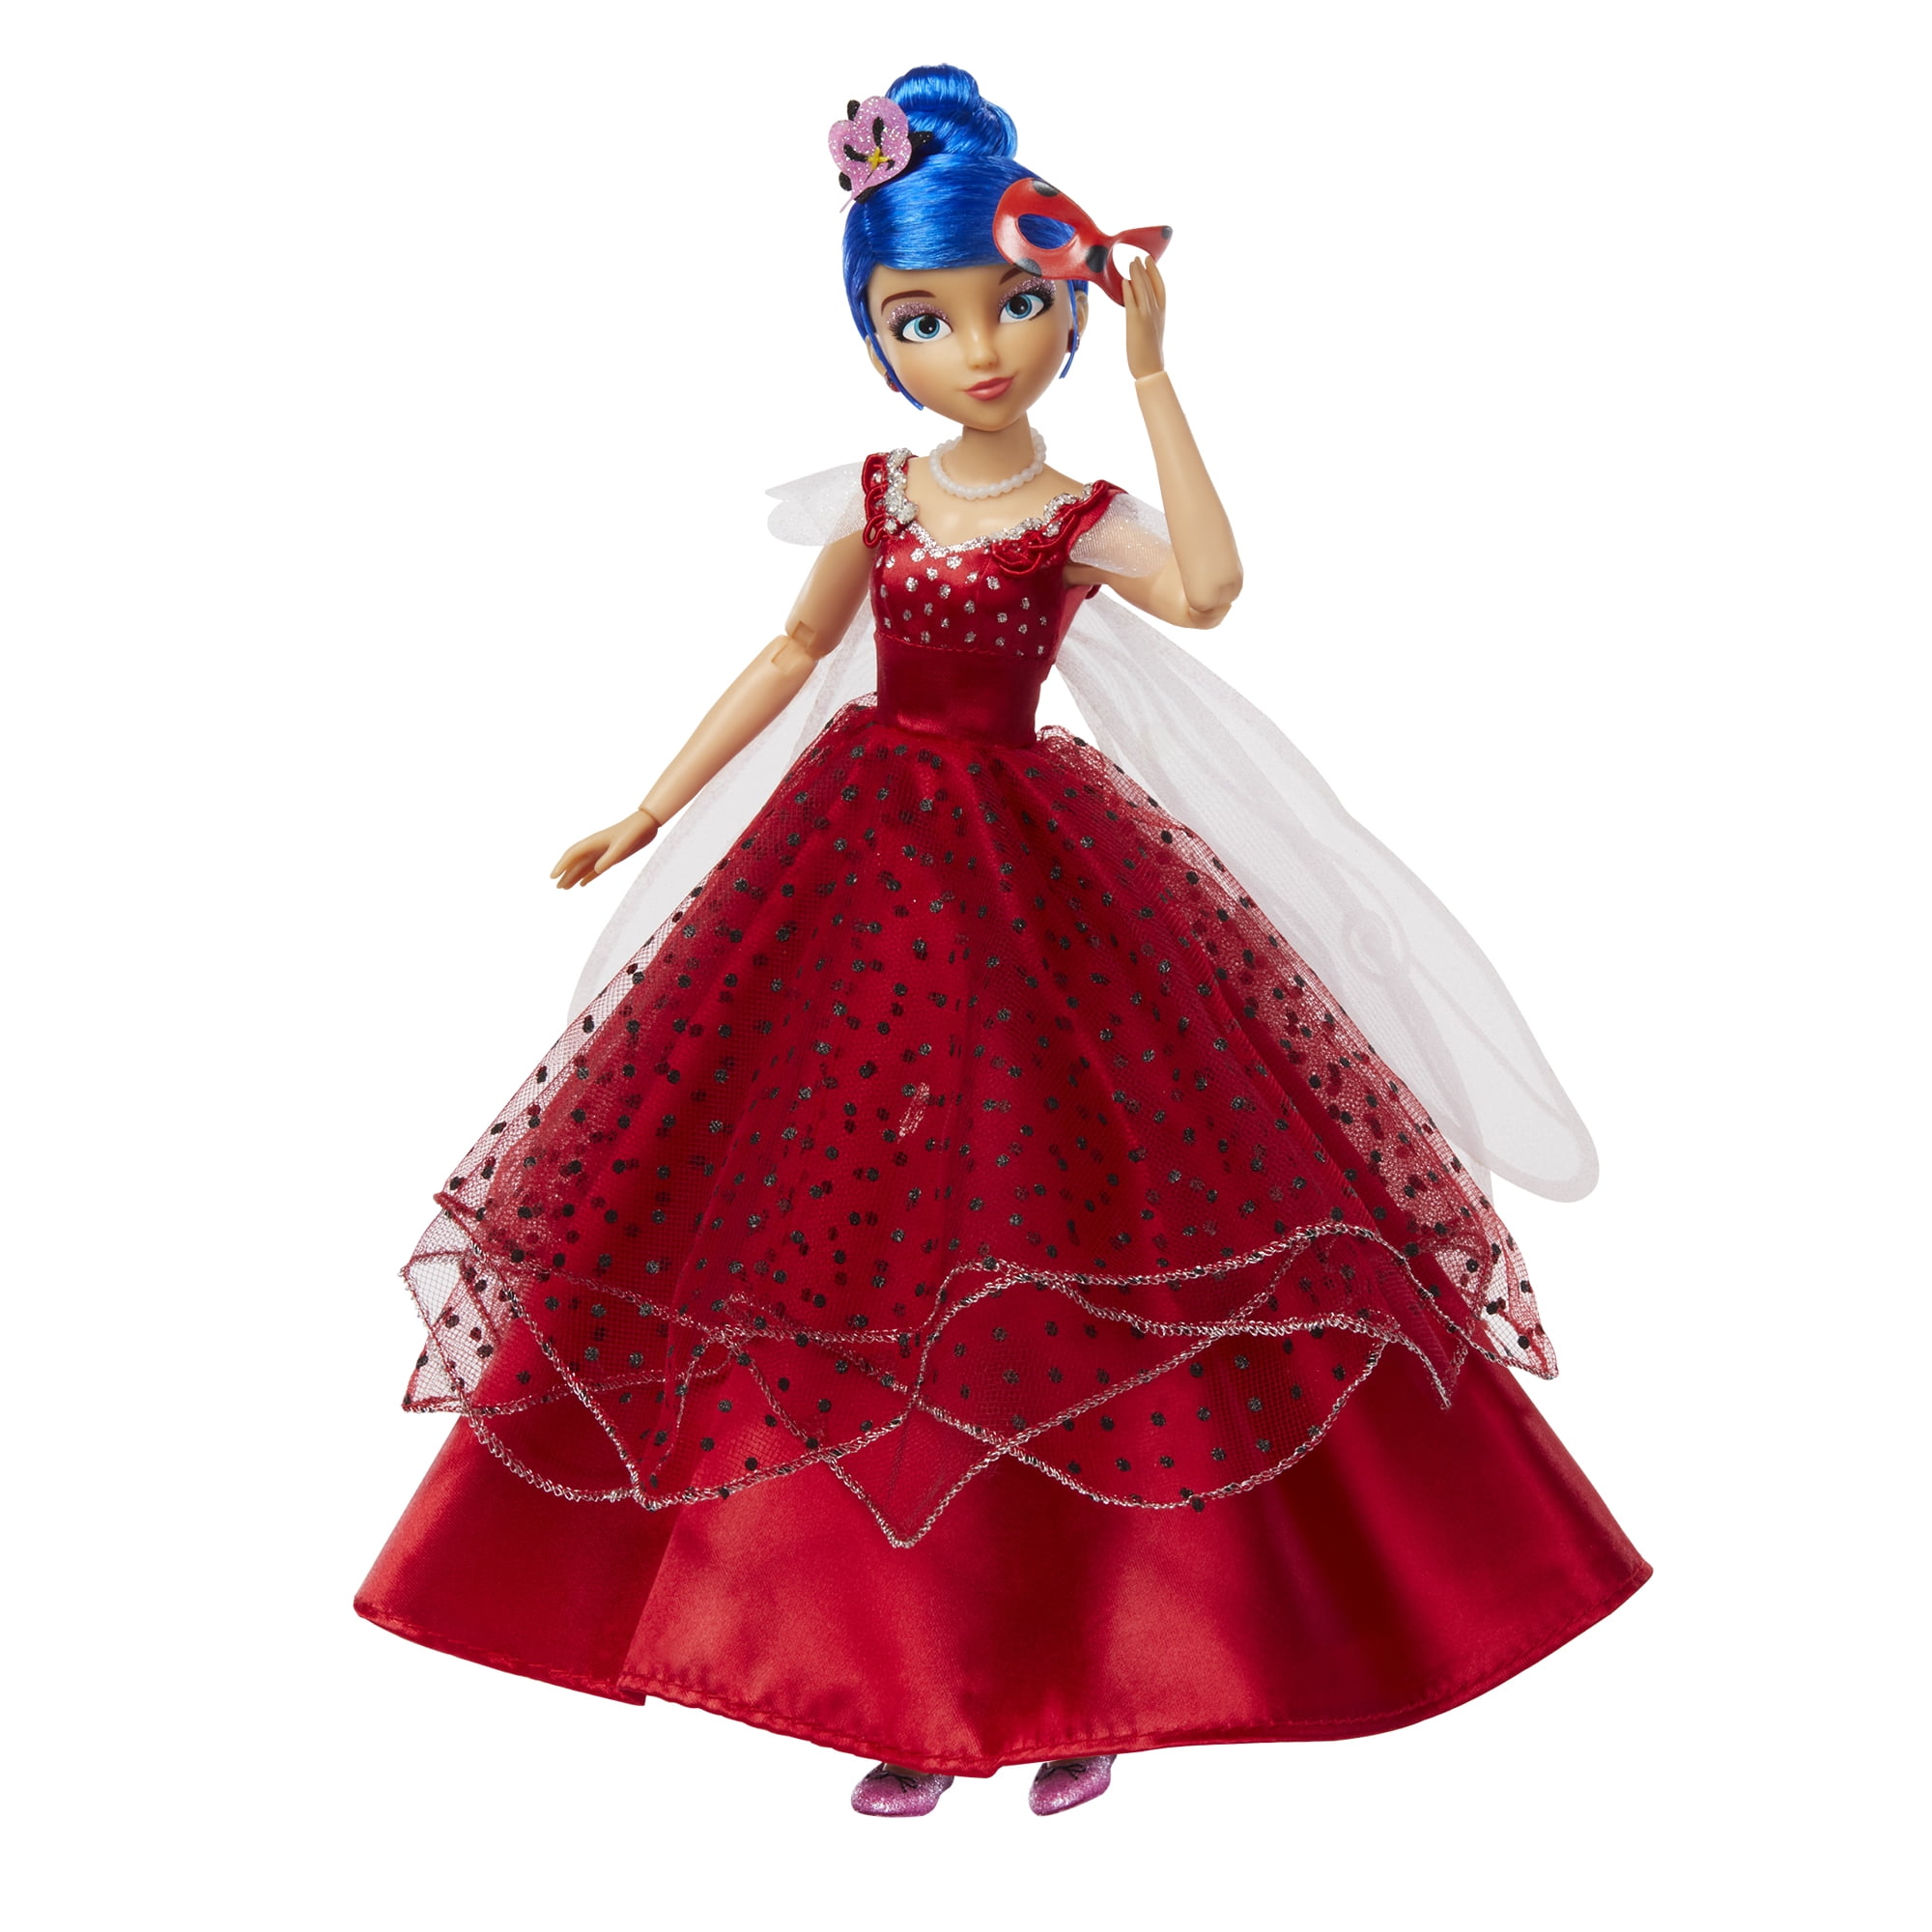 Miraculous: Tales of Ladybug Dress Up and Play Set - Red/Black for